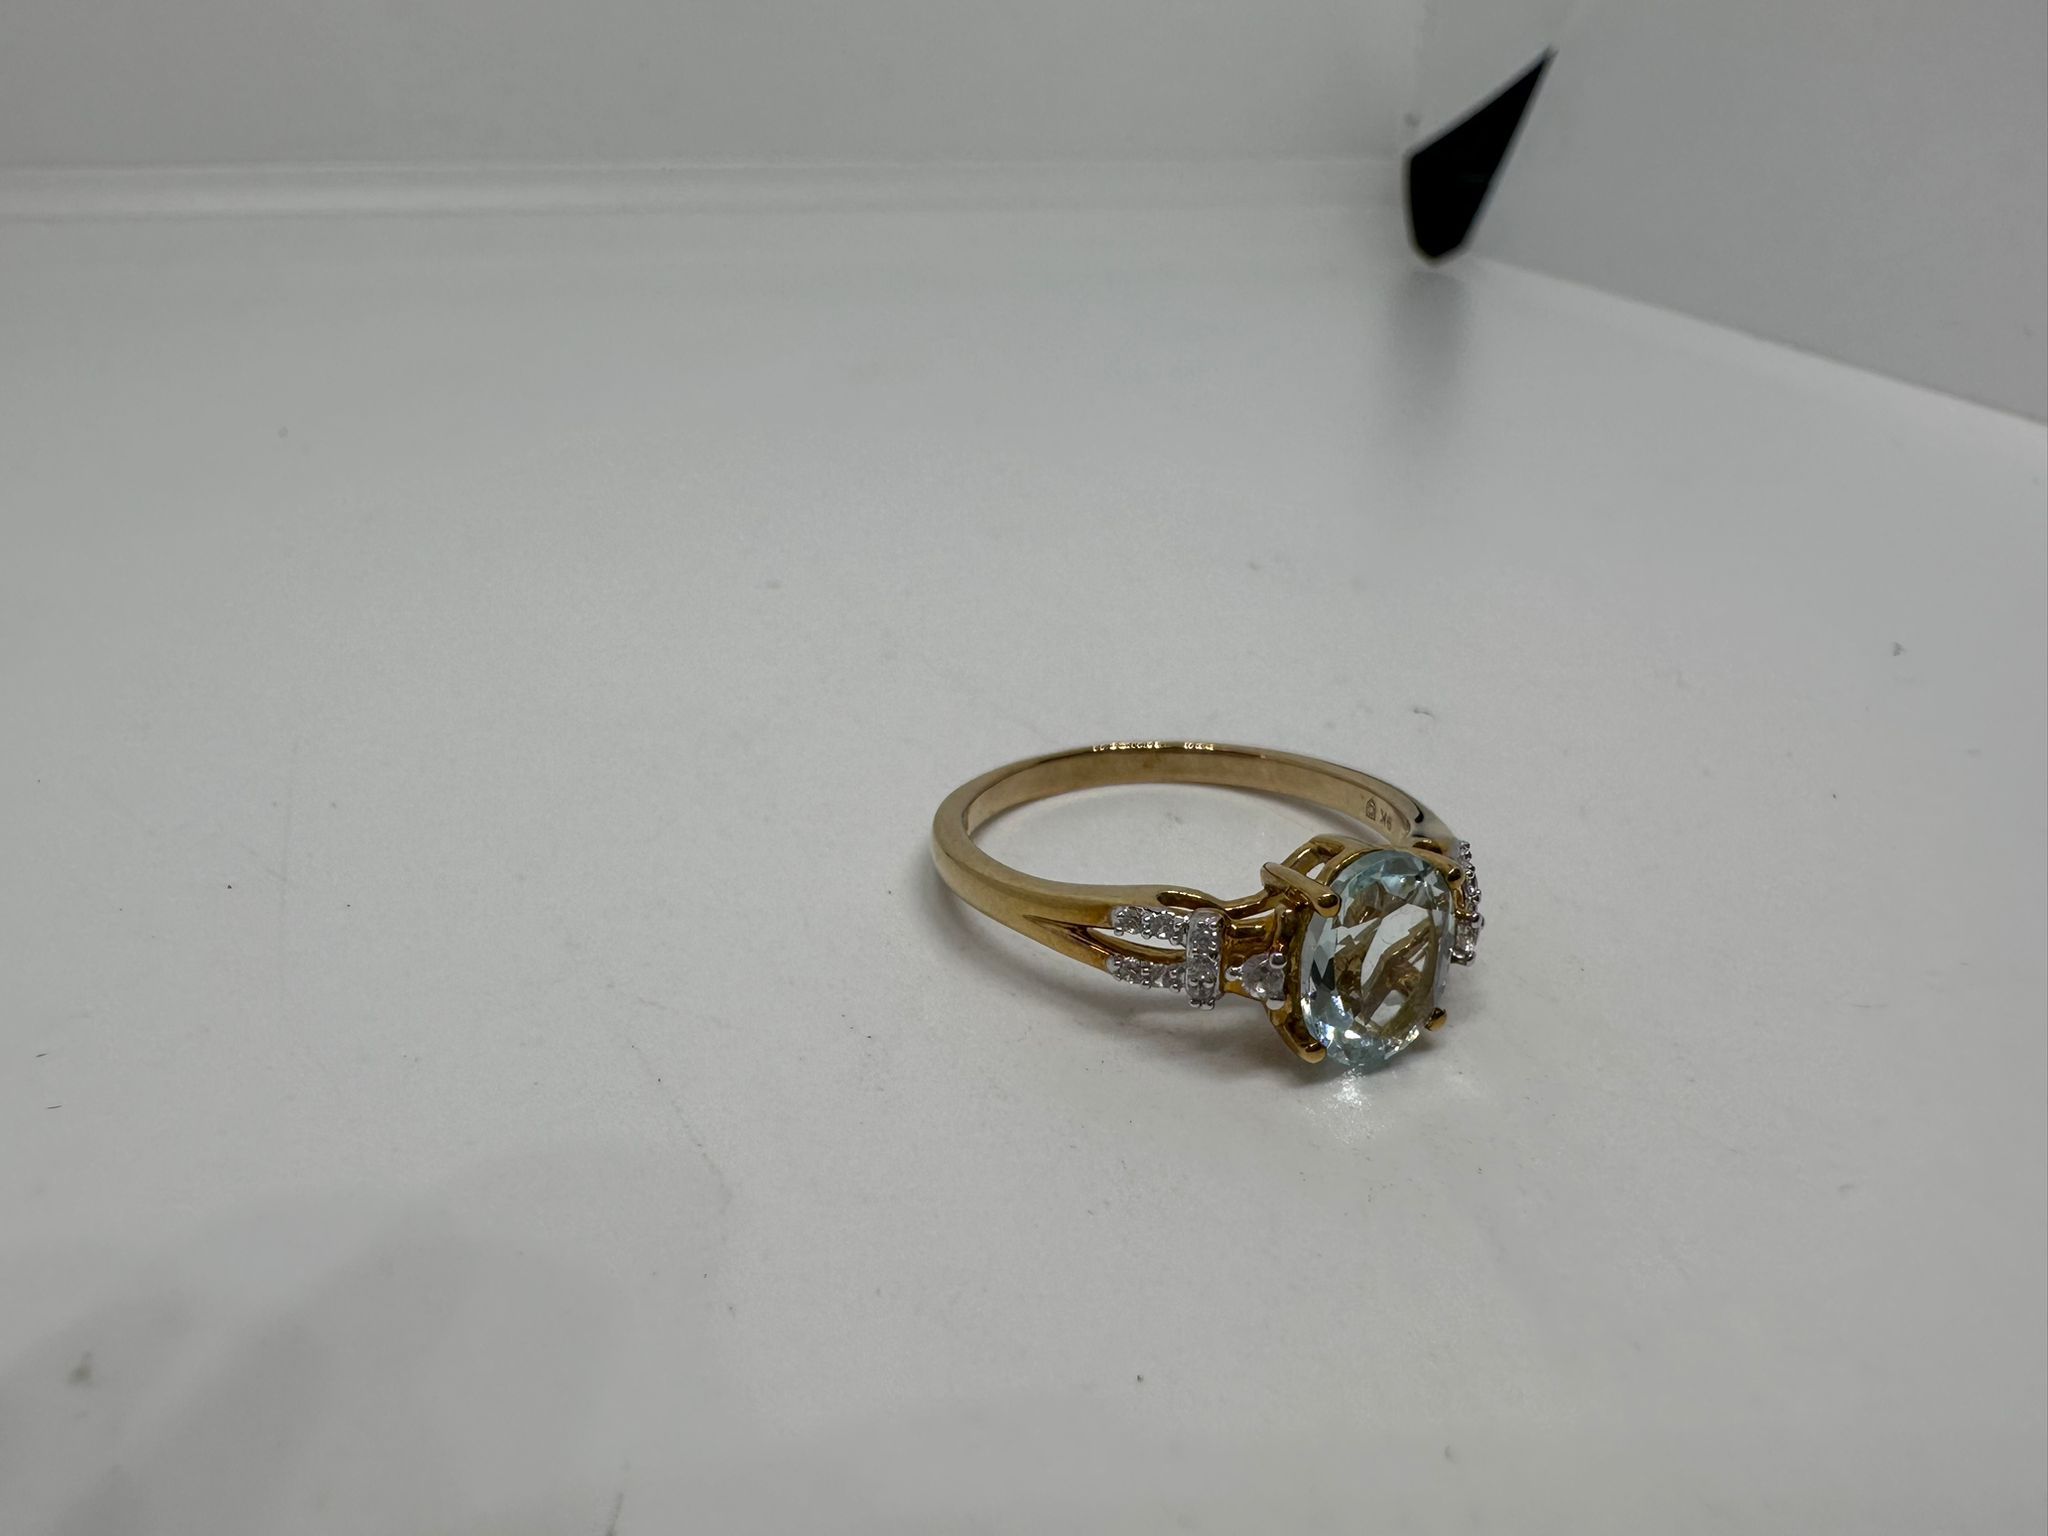 9ct gold aqua marine and white spinnel ring - Image 3 of 3